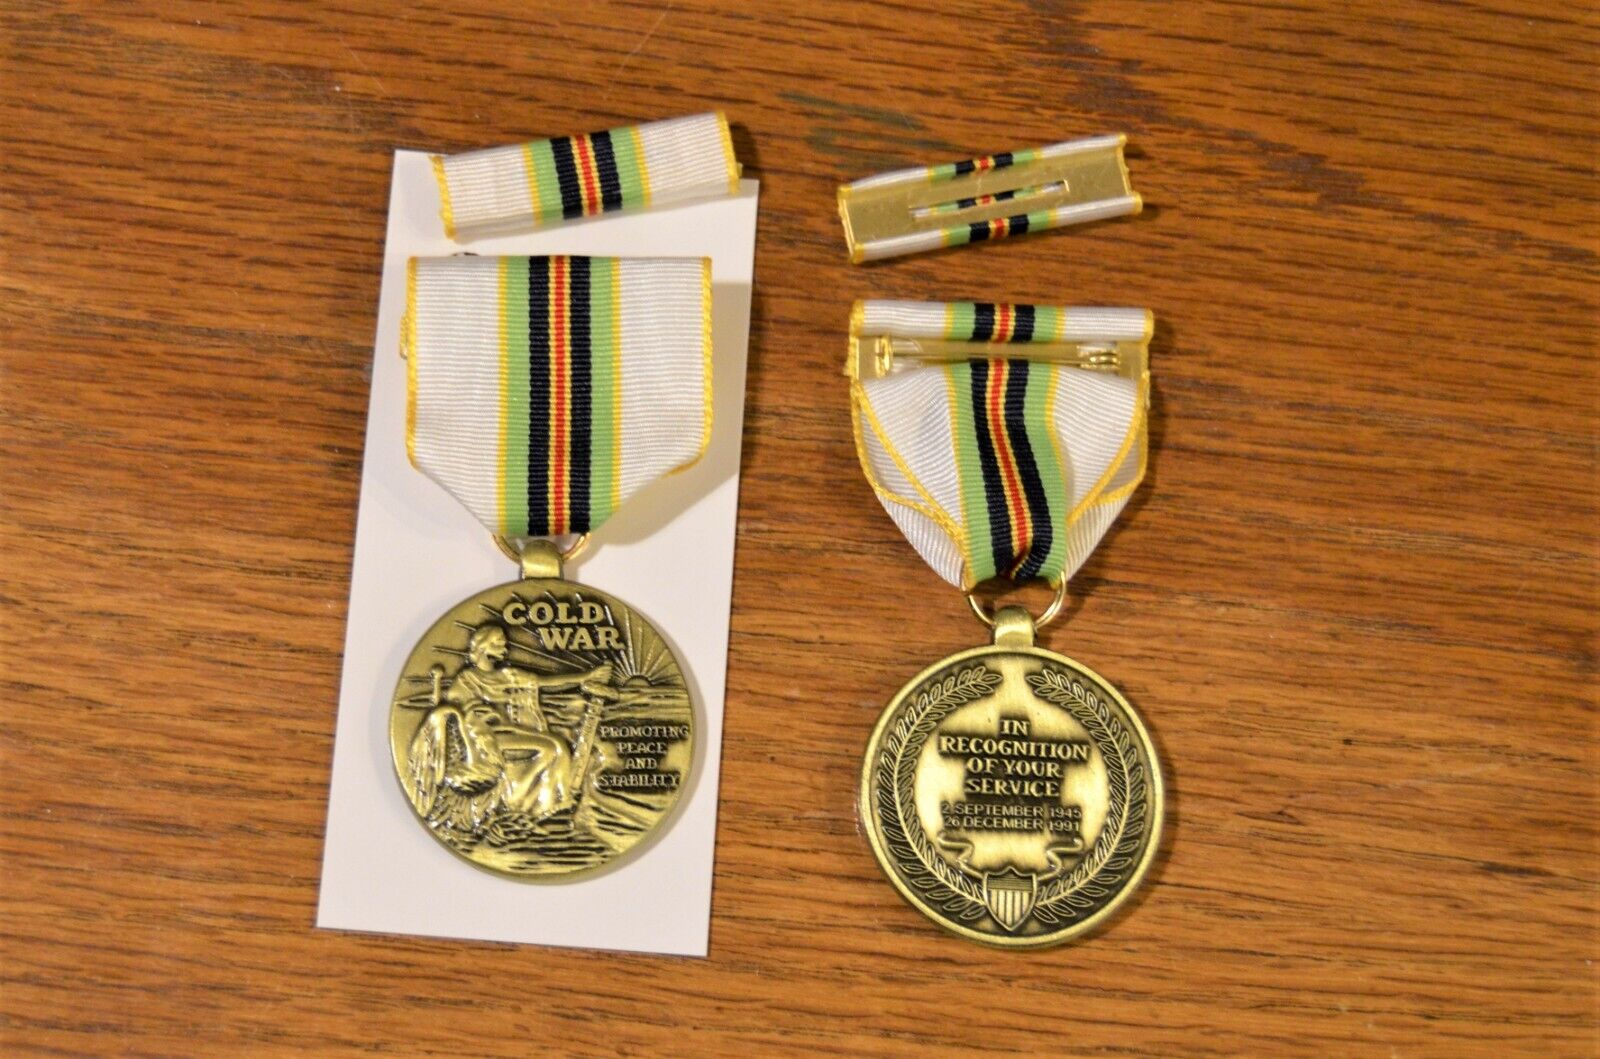 FULL SIZE COLD WAR VICTORY SERVICE MEDAL with RIBBON